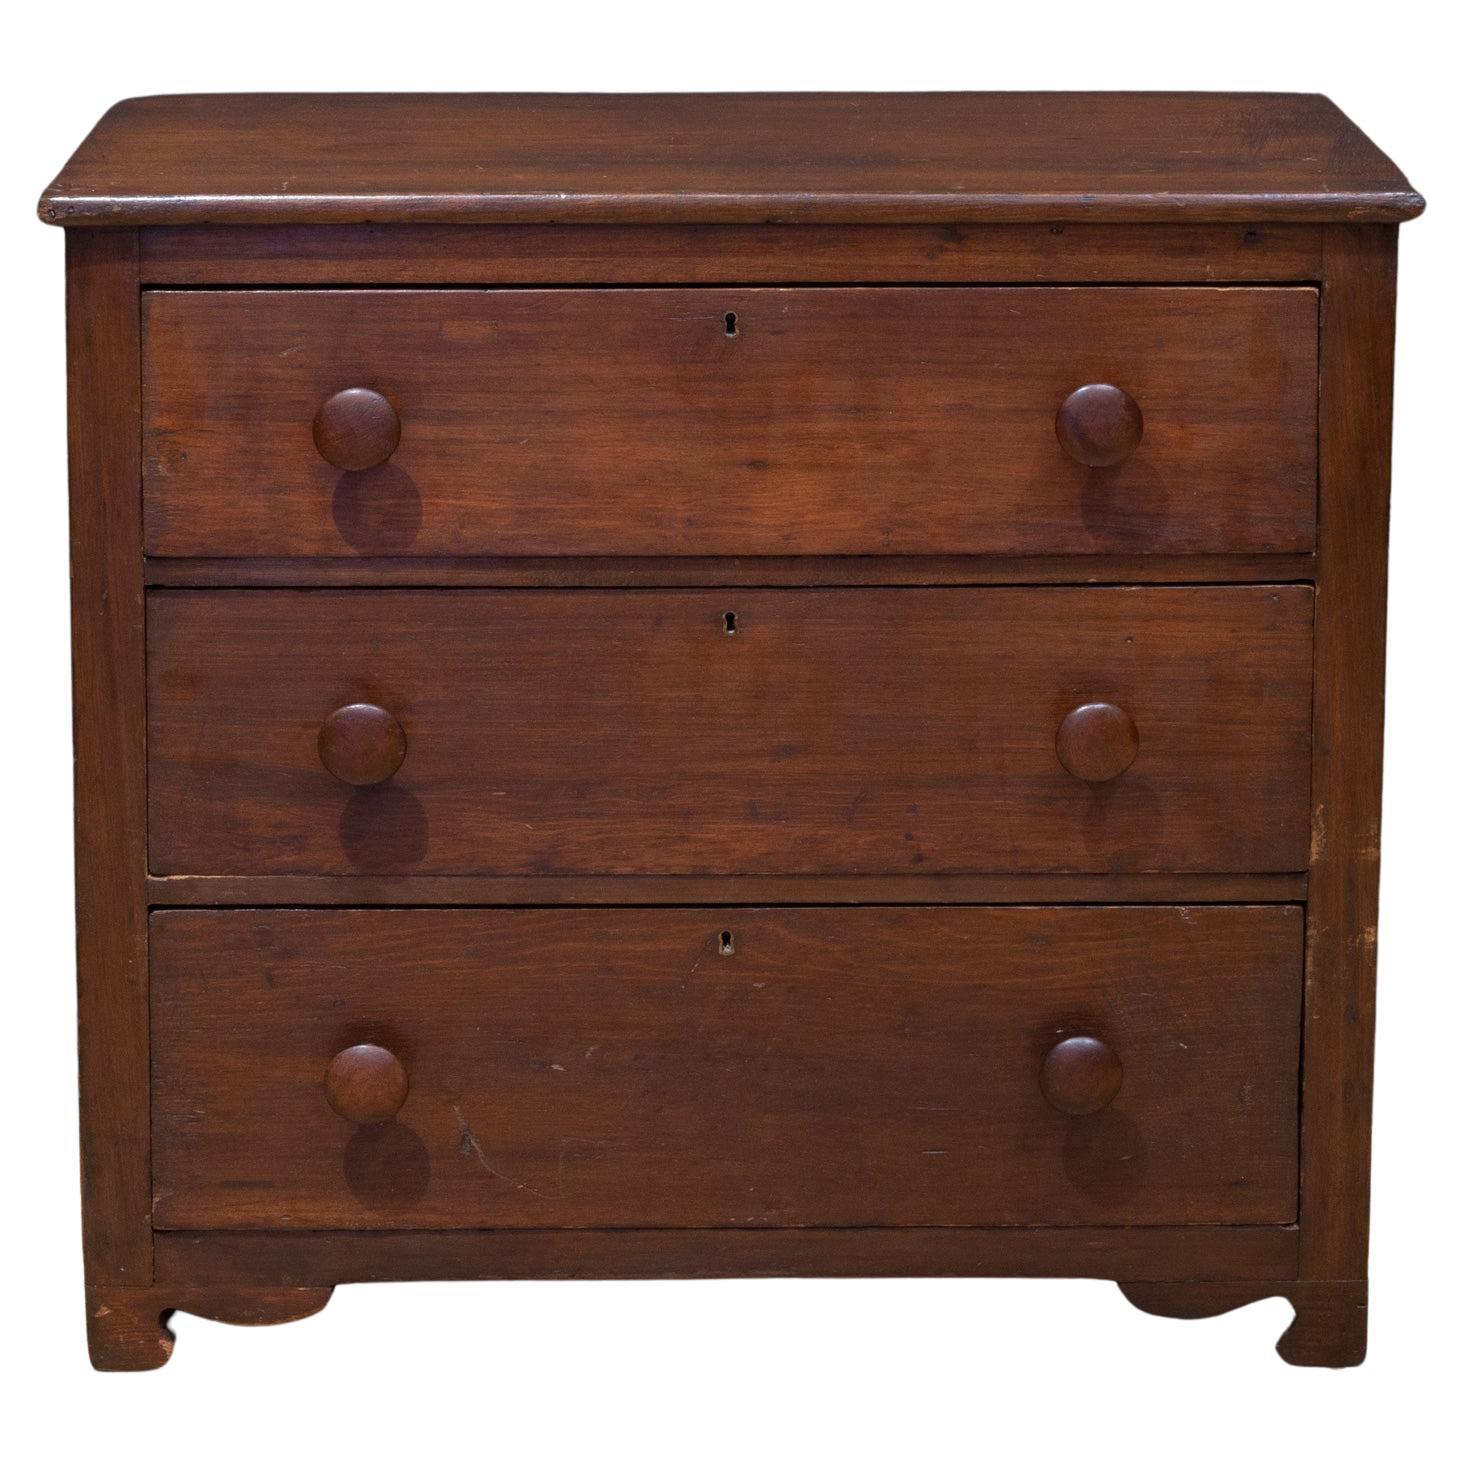 19th c. Primitive Mahogany Chest of Drawers For Sale